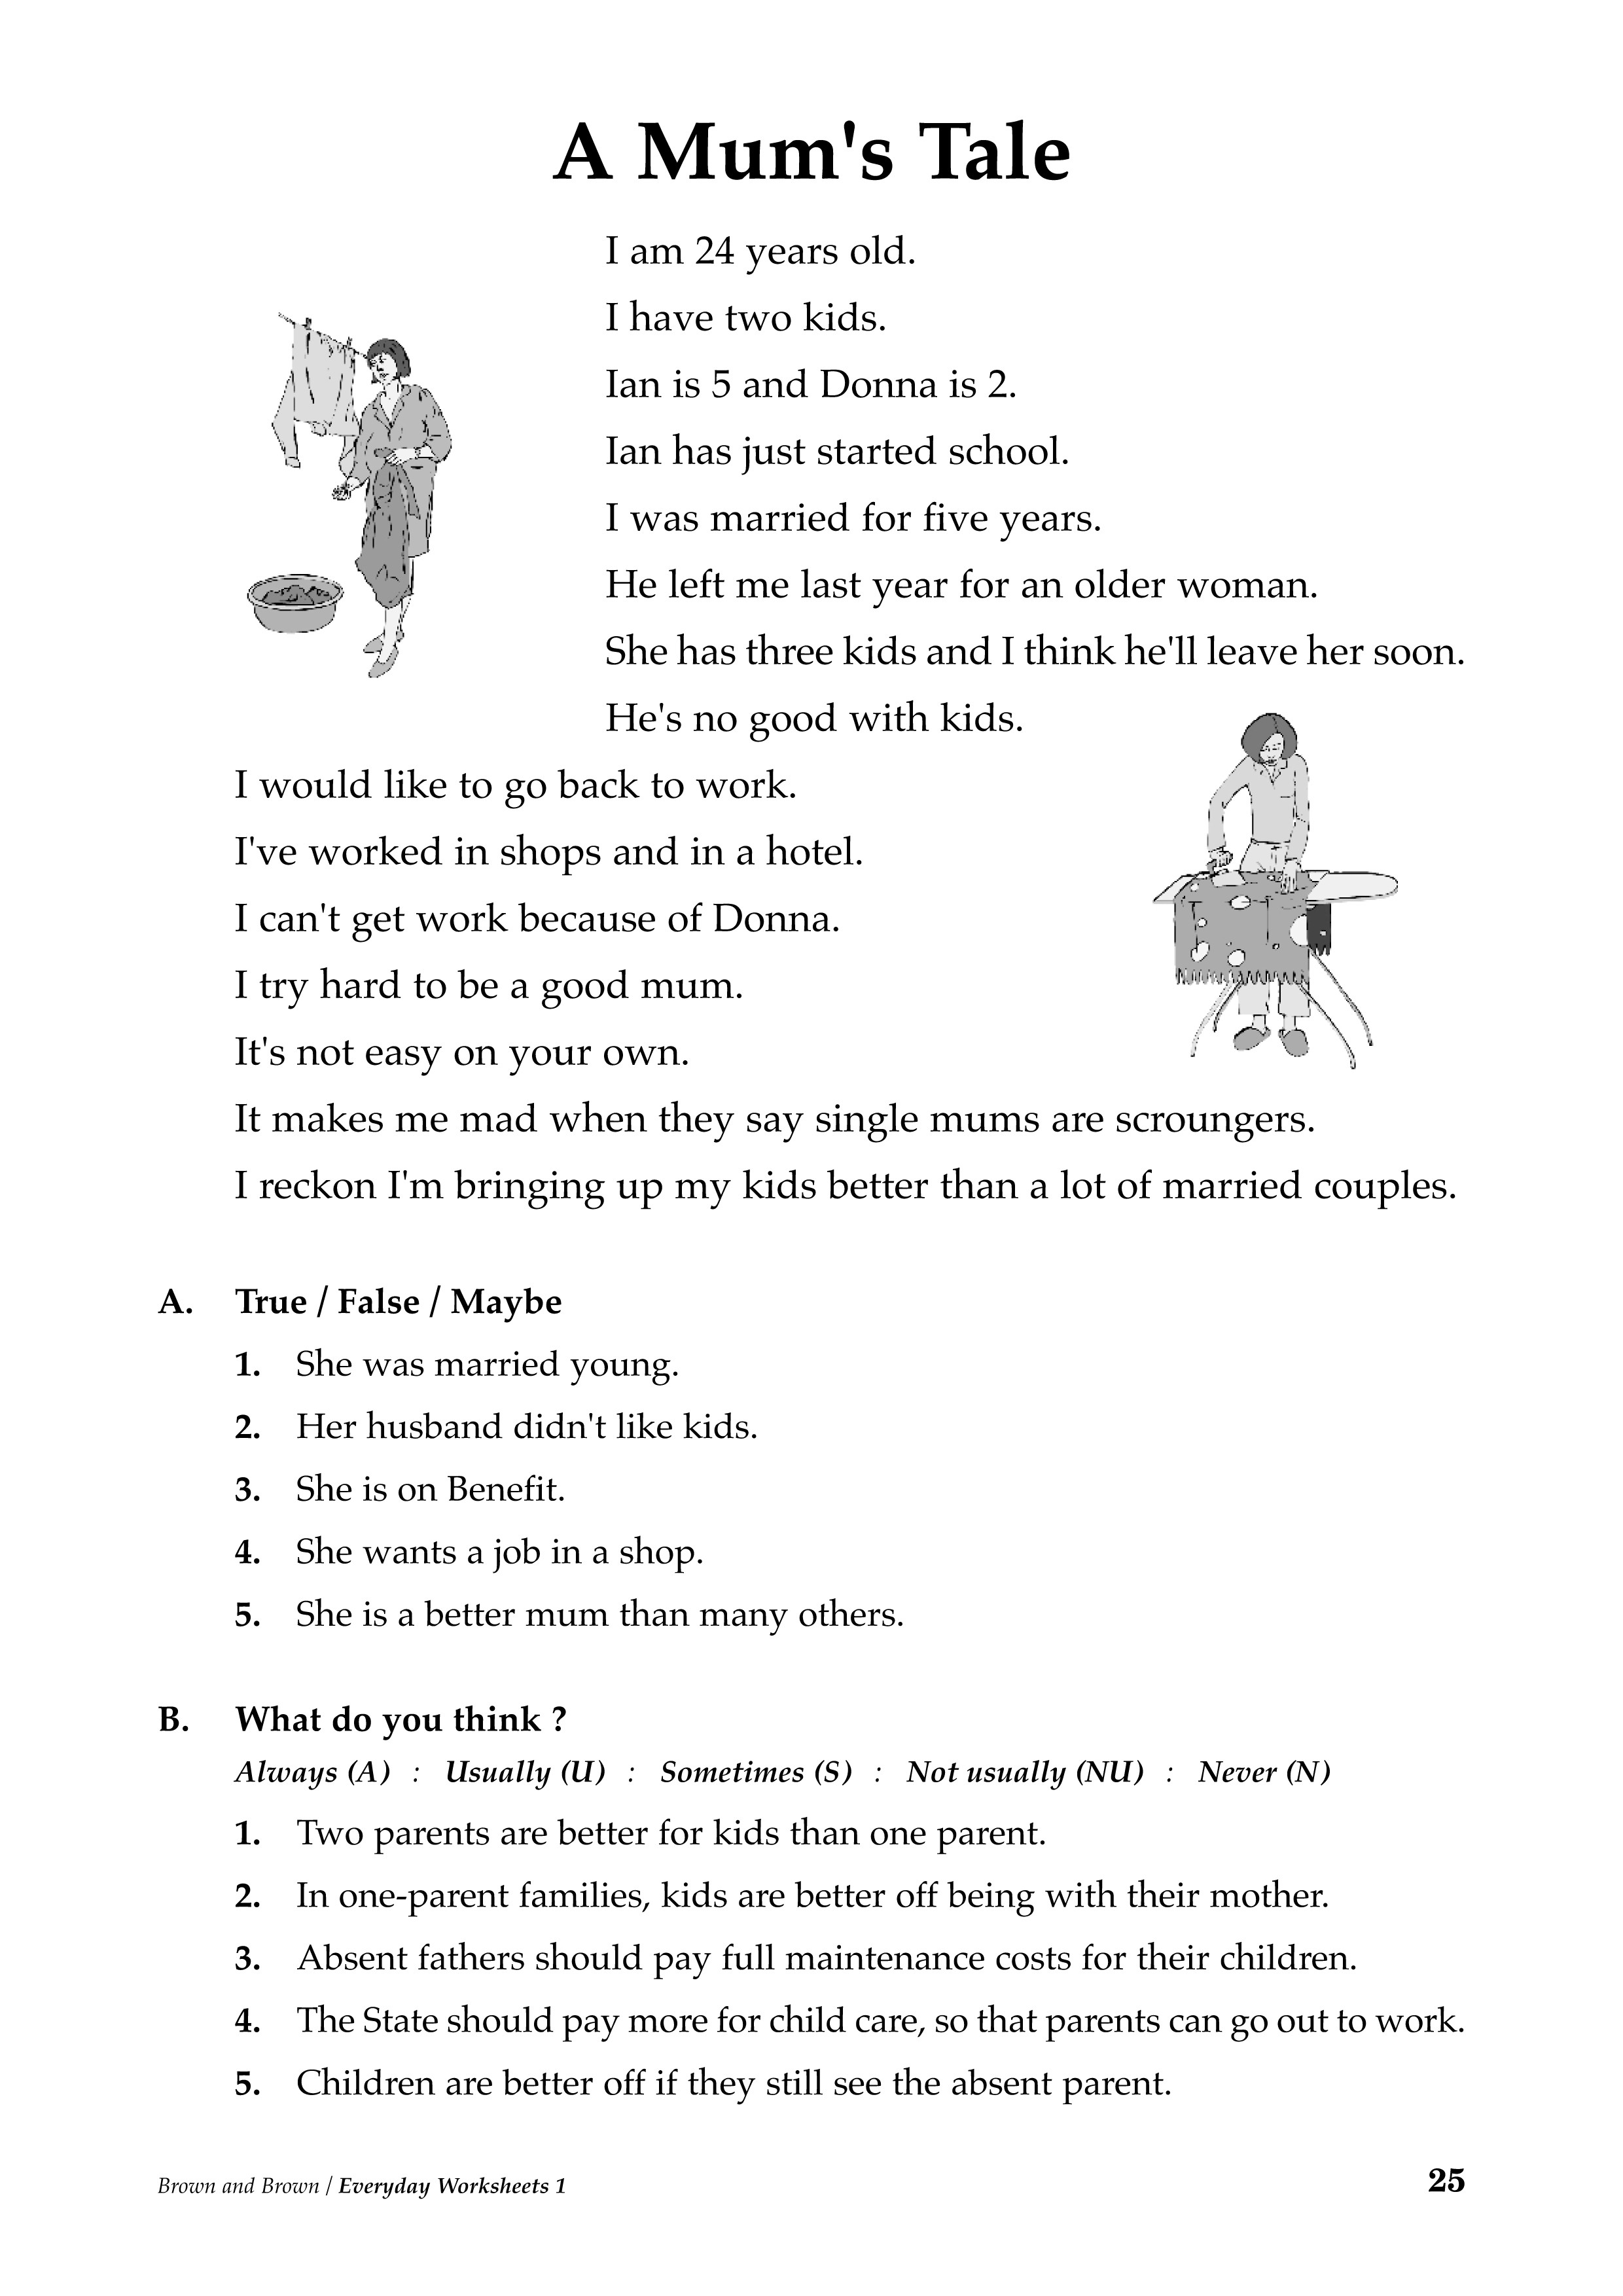 15-best-images-of-dyslexia-spelling-worksheets-adult-spelling-worksheets-spelling-practice